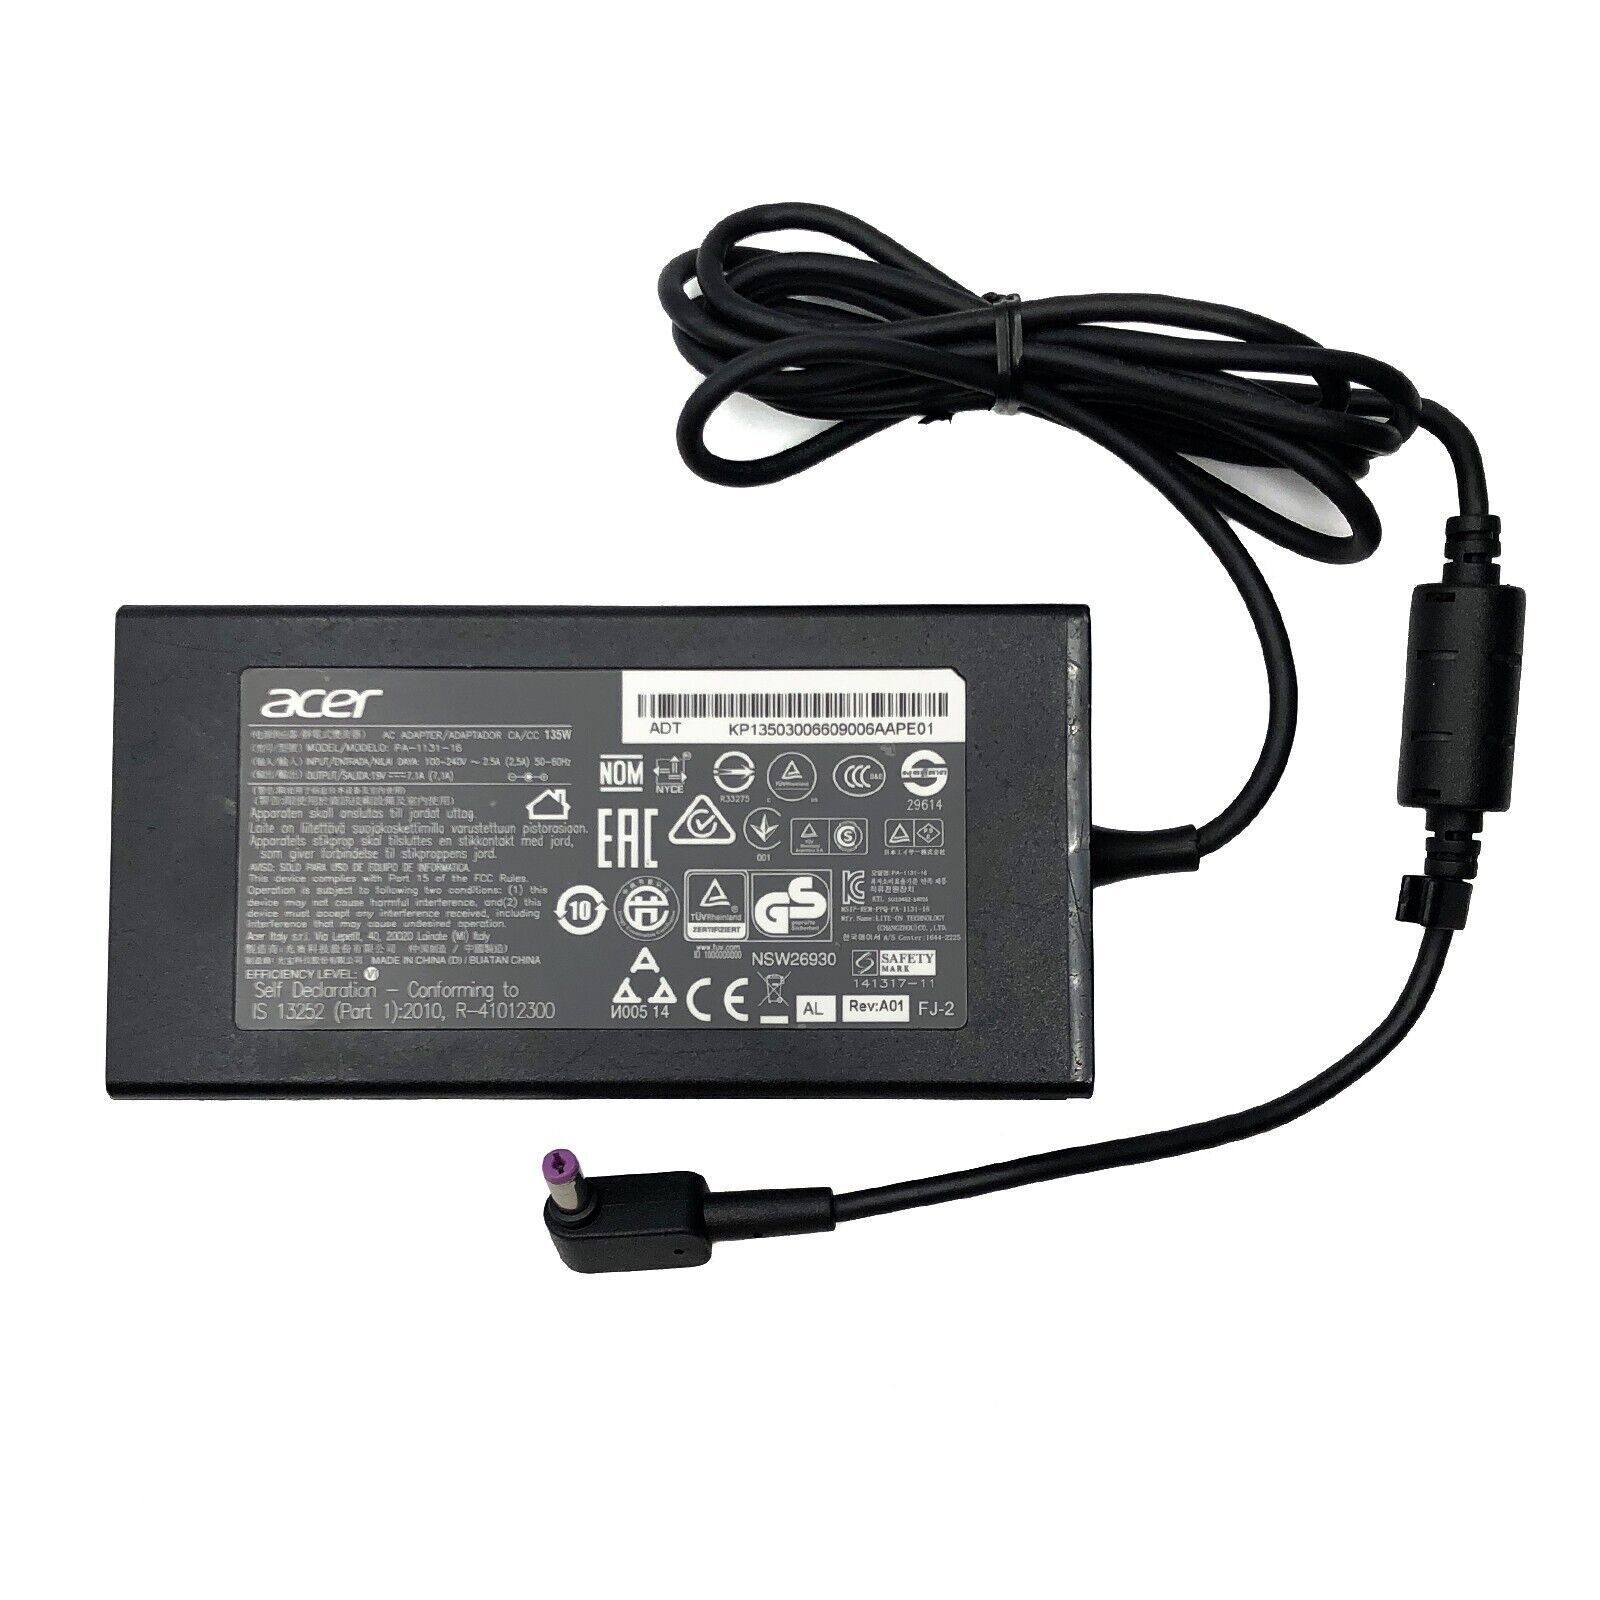 OEM Acer 135W AC Power Adapter for Acer Predator X34A X34P X34V Monitor w/PC